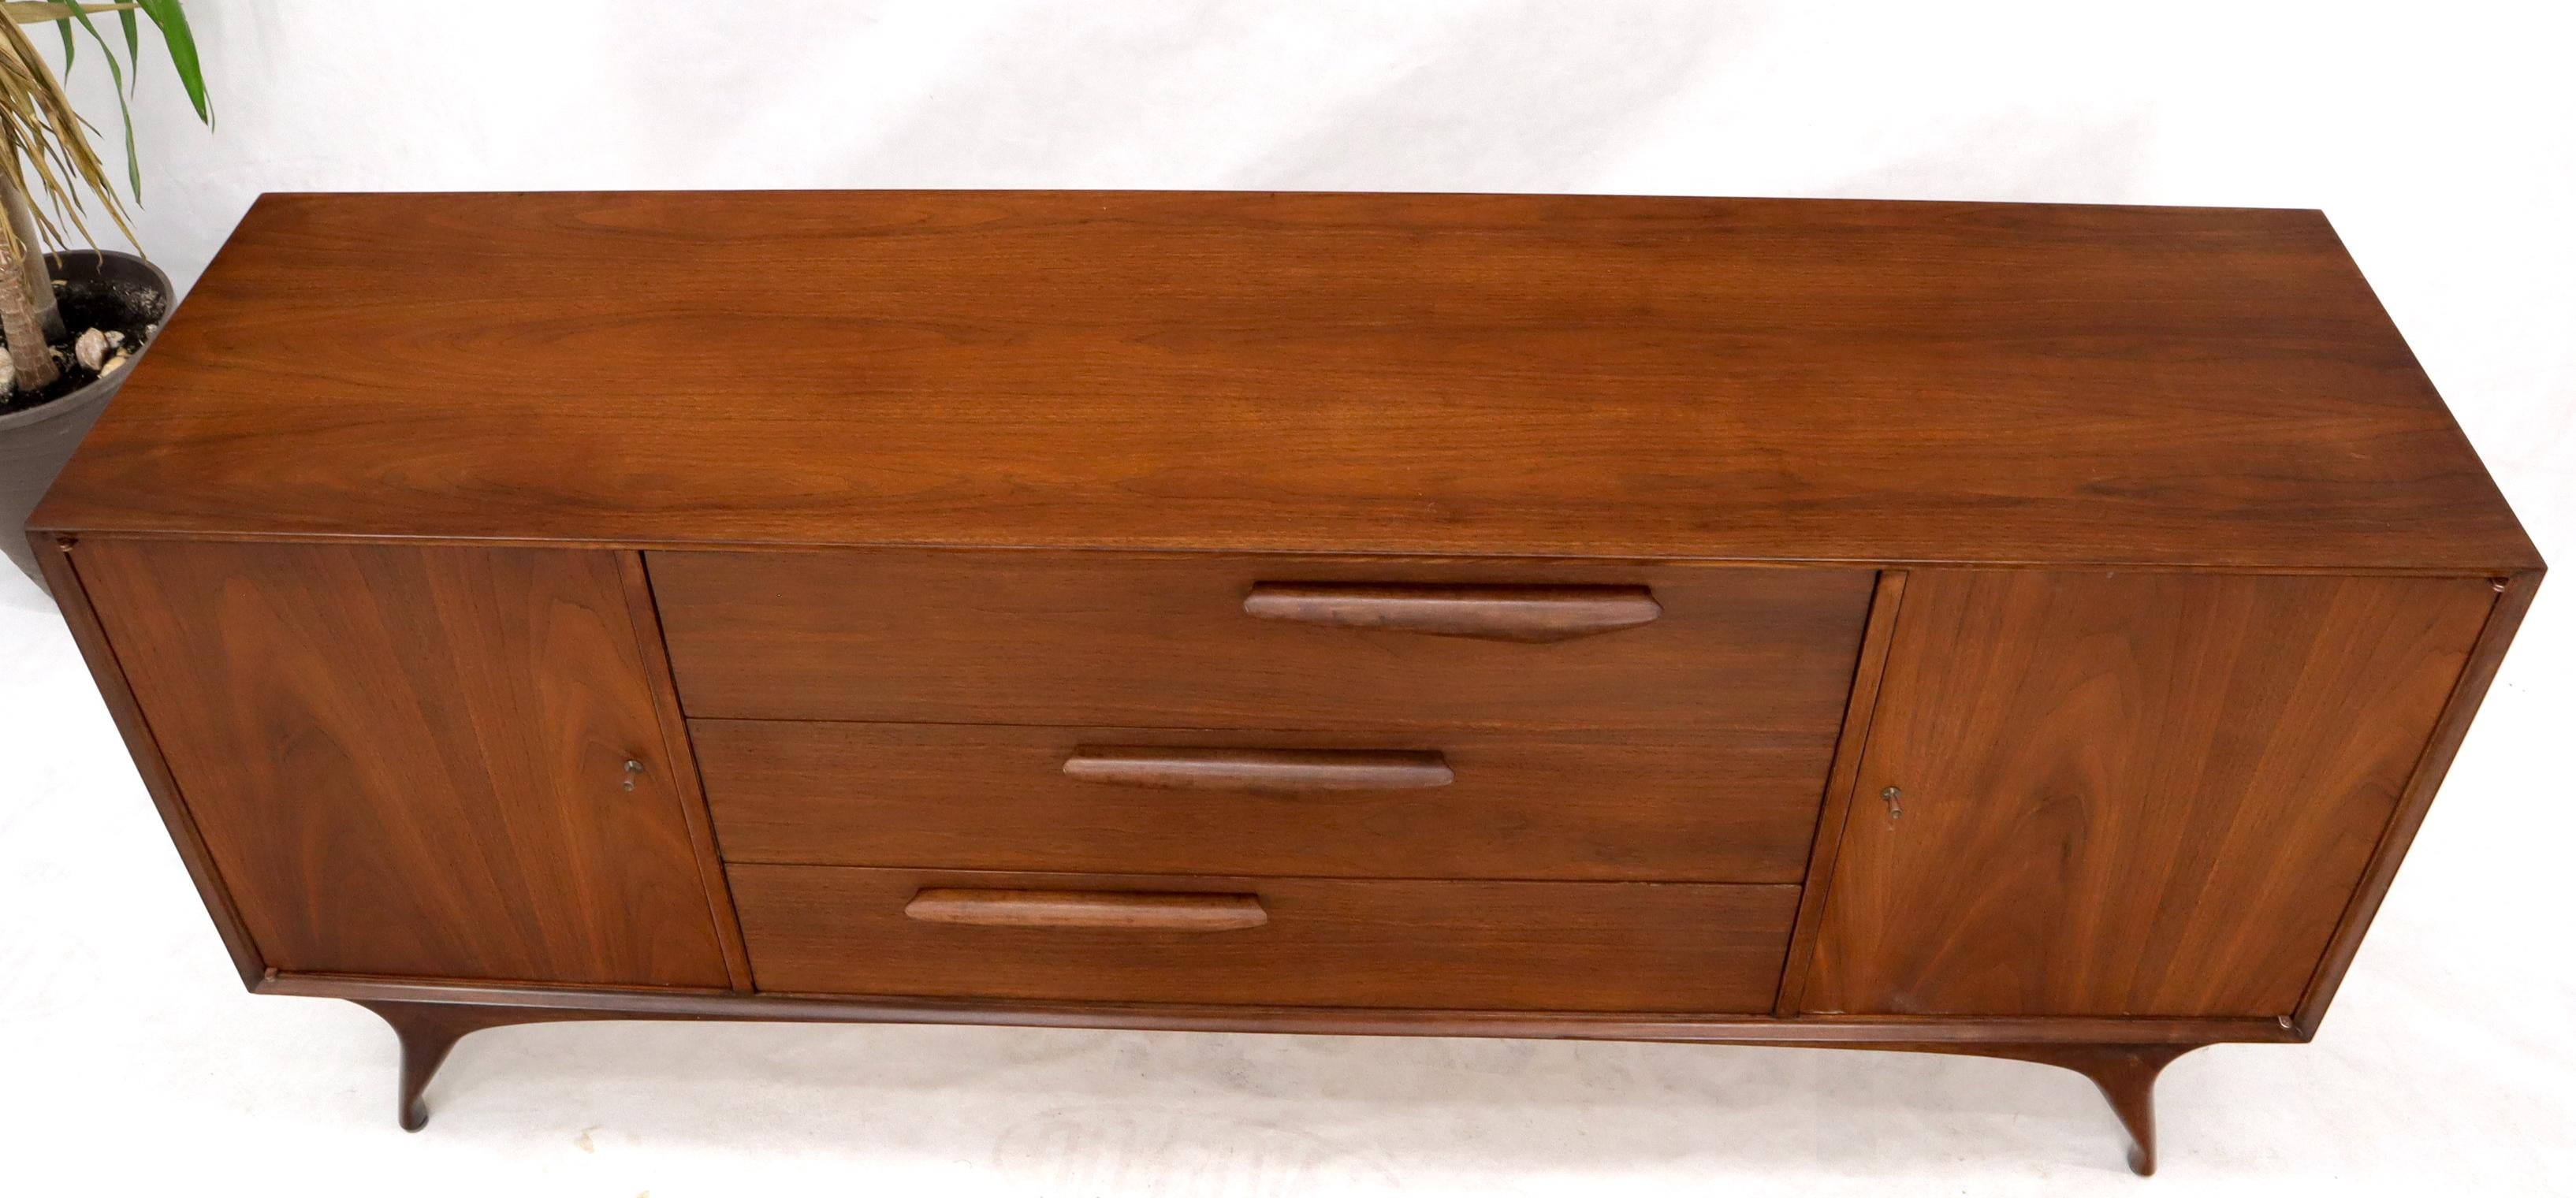 American Sculptural Legs Long 9 Drawers Walnut Credenza Dresser with Doors For Sale